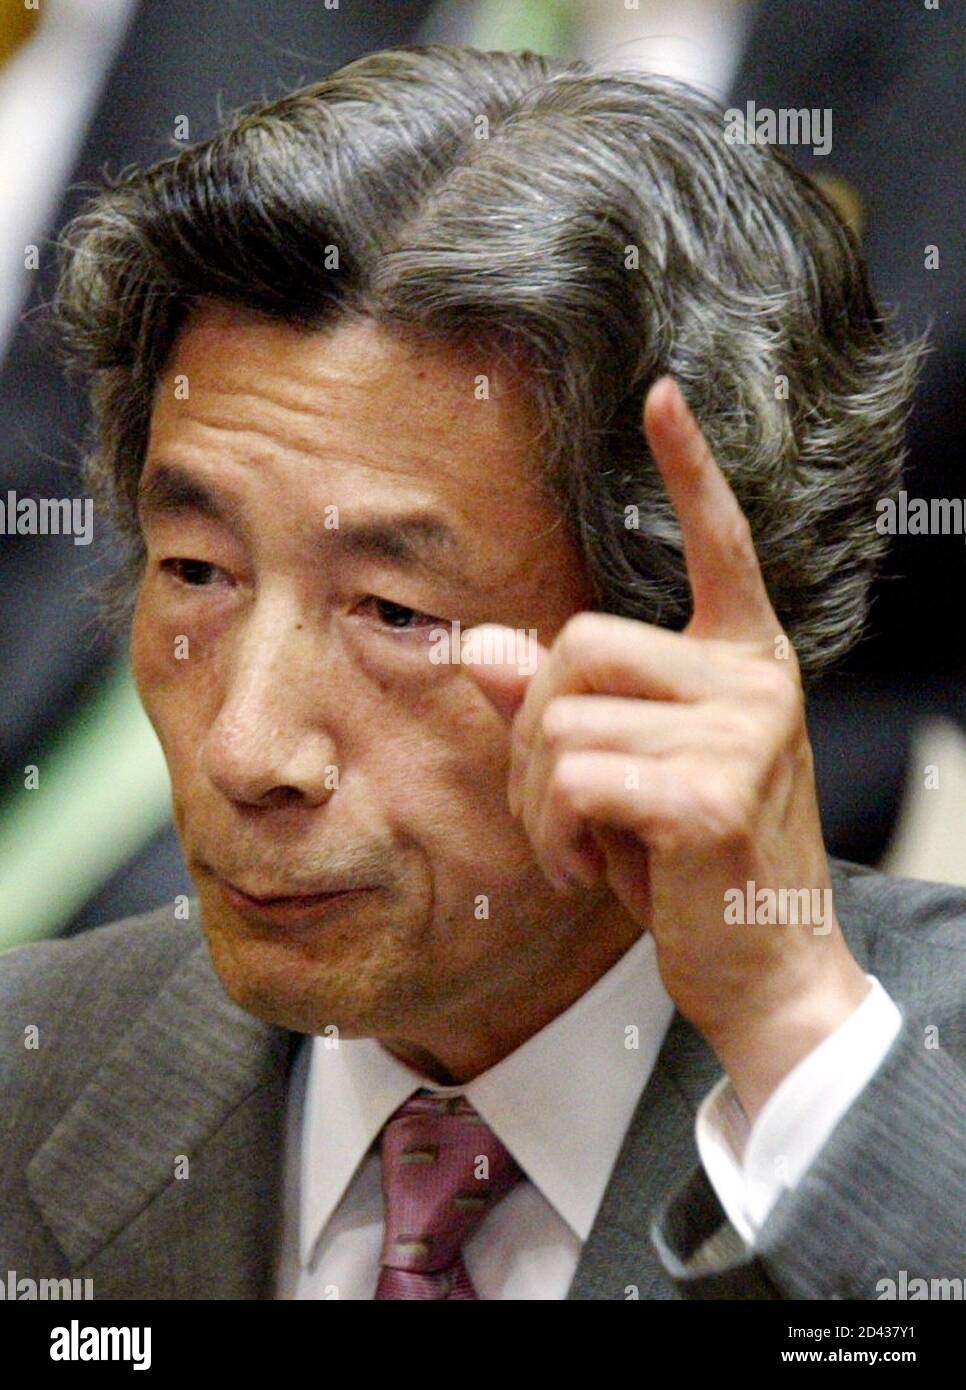 Japanese Prime Minister Junichiro Koizumi answers a question from opposition at a Lower House budget committee session of parliament in Tokyo October 24, 2002. Risking a revolt in his own party, Koizumi stood firm in support of his besieged banking regulators on Thursday, backed by signs the Bank of Japan would help ease the paign of tough reforms. REUTERS/Toshiyuki Aizawa  TA/CP Stock Photo